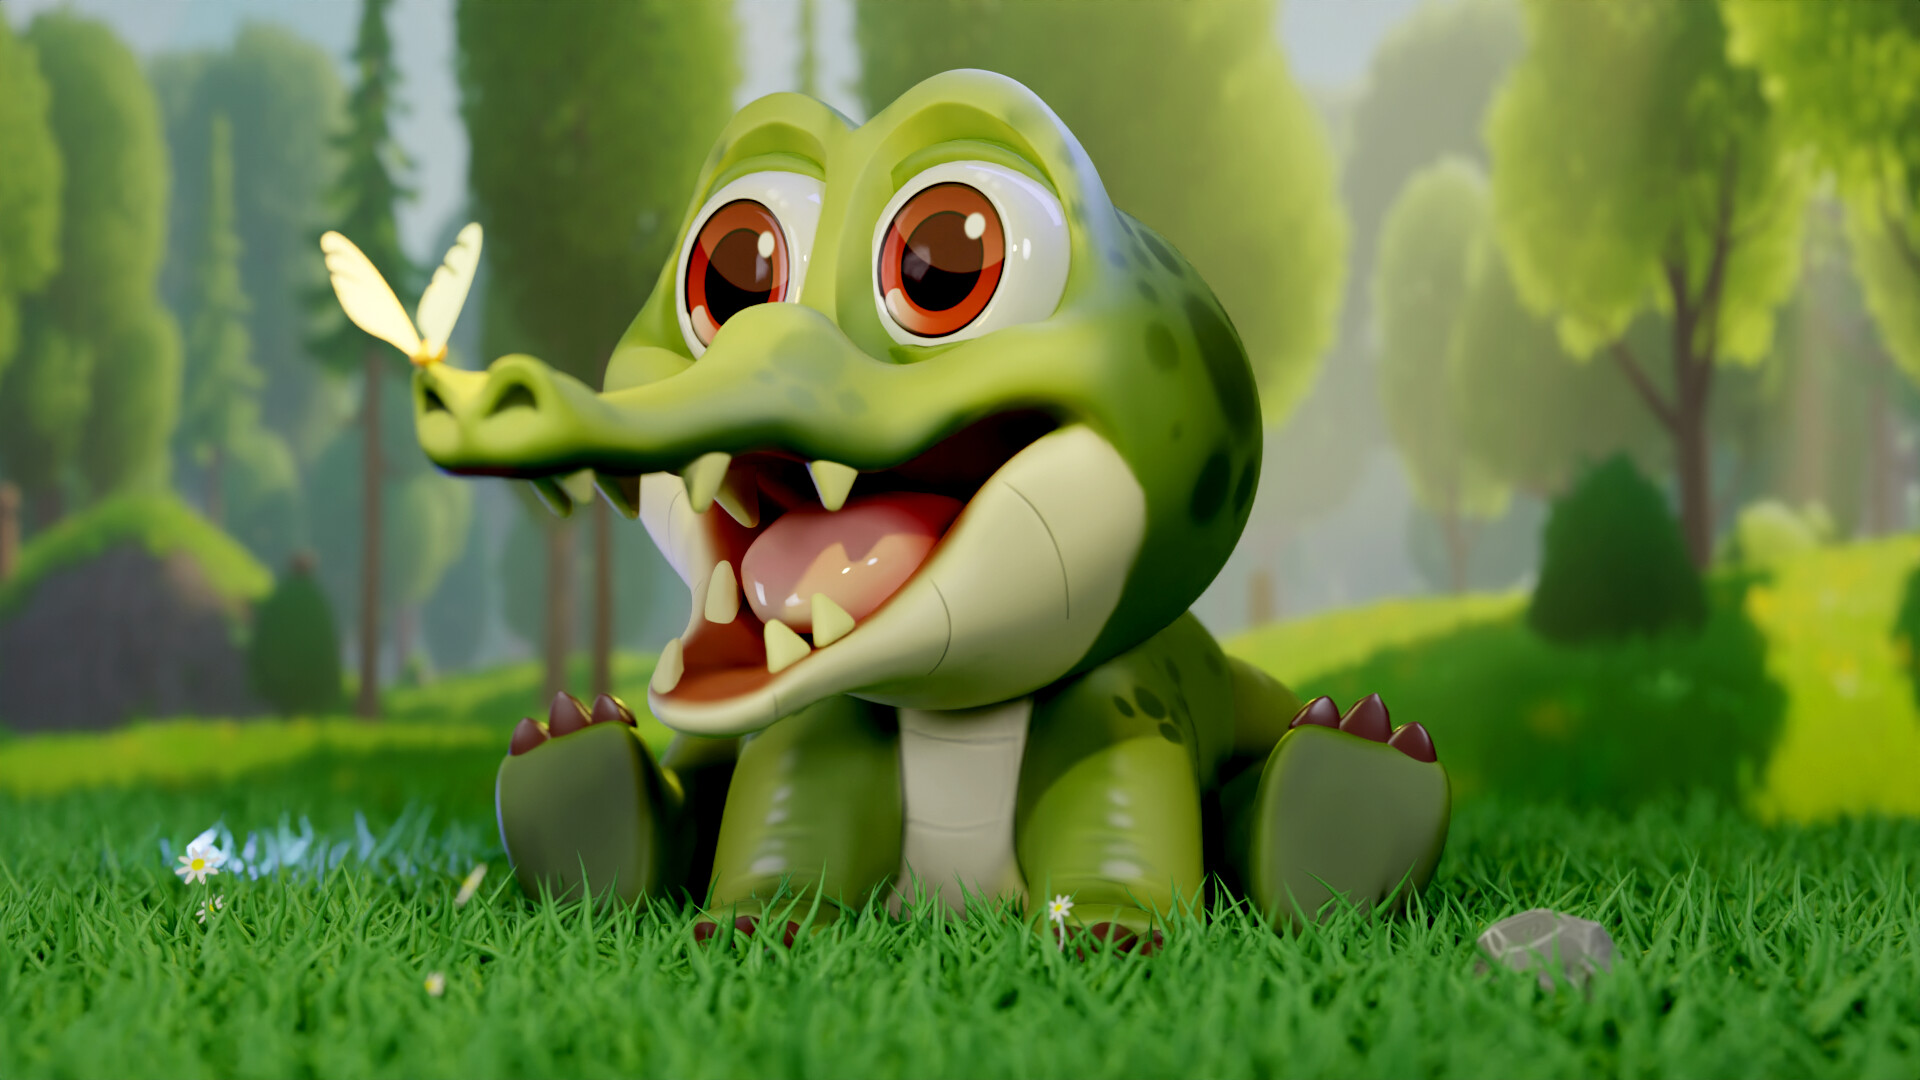 Little crocodile 3D - Finished Projects - Blender Artists Community